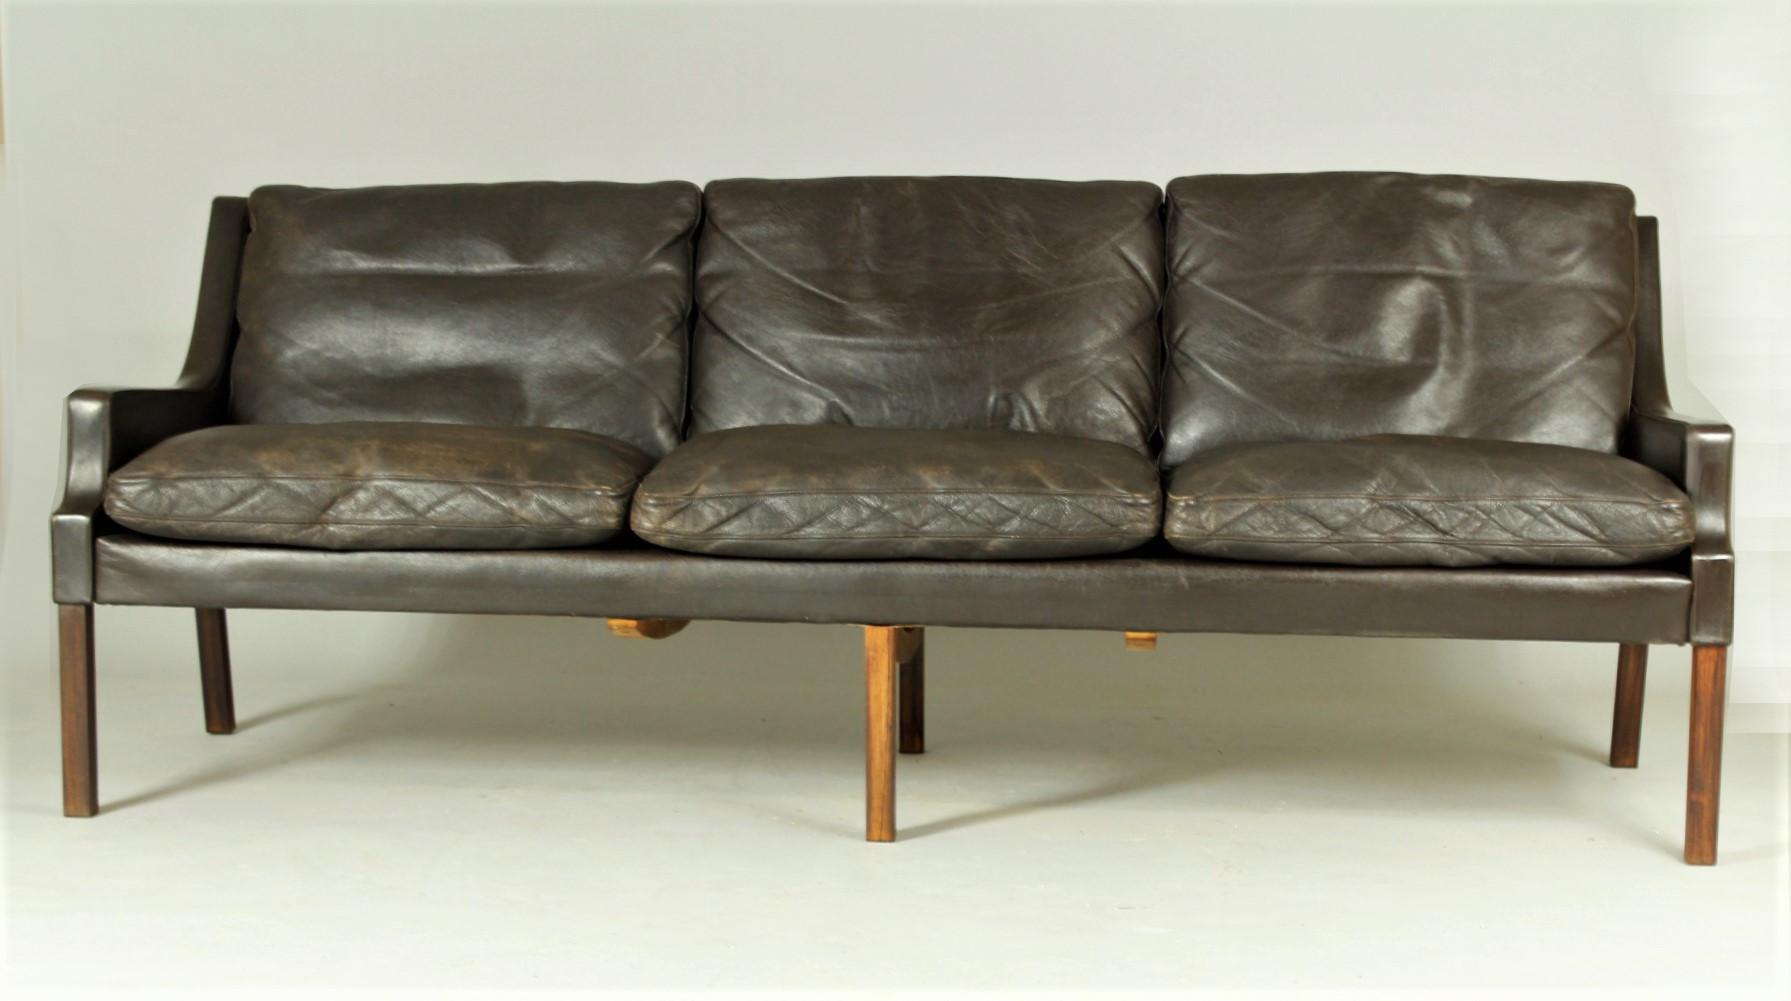 This Danish sofa from the 1960s was designed by Rud Thygesen and manufactured by AS Vejen Polstermøbelfabrik. It is in chocolate brown worn leather and is in good vintage condition.